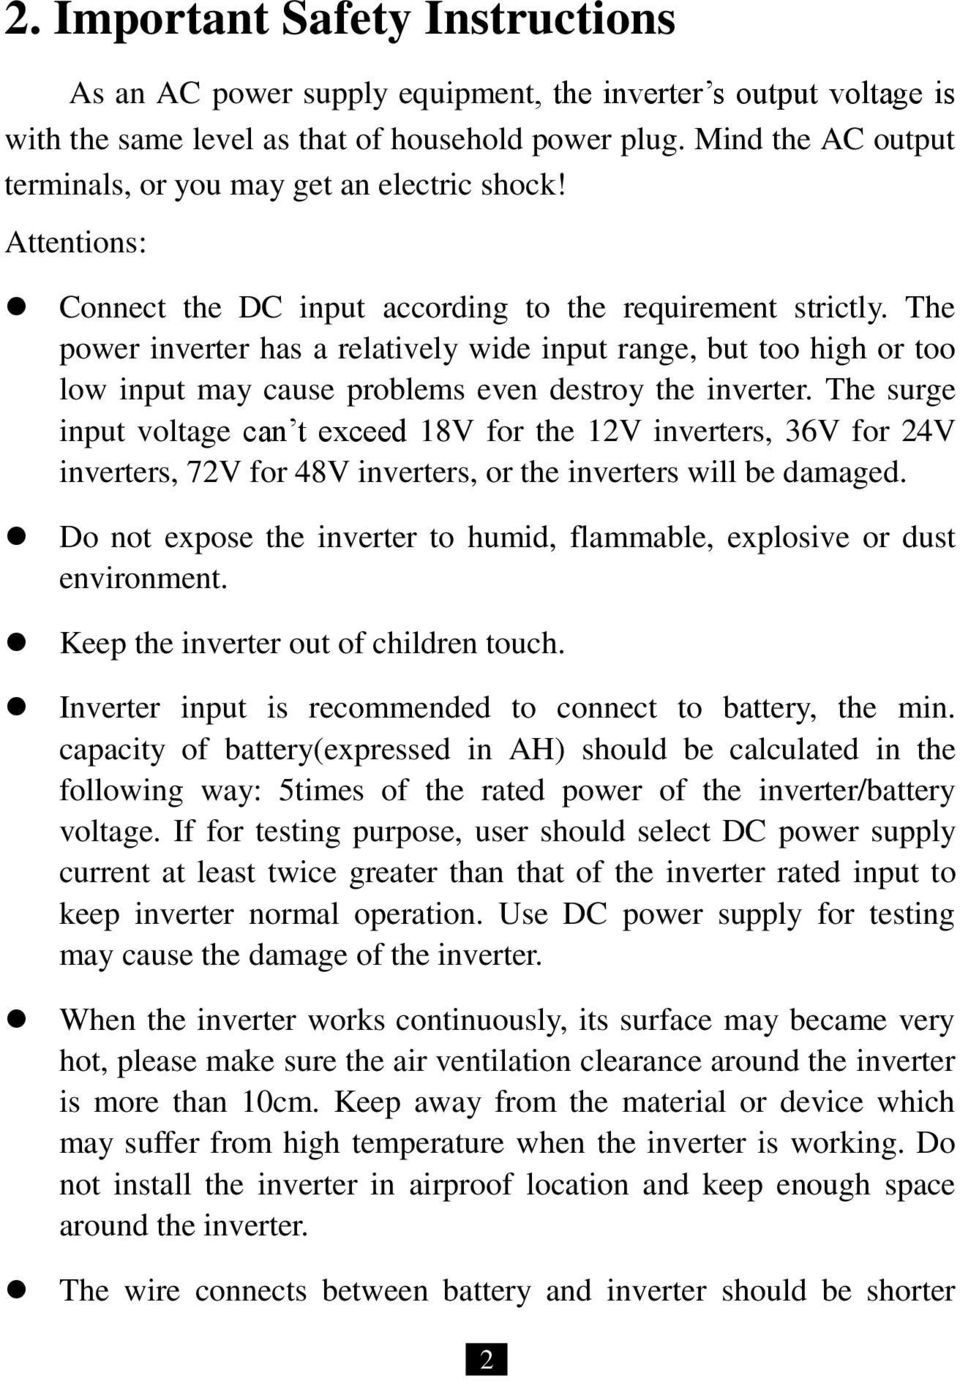 The power inverter has a relatively wide input range, but too high or too low input may cause problems even destroy the inverter.